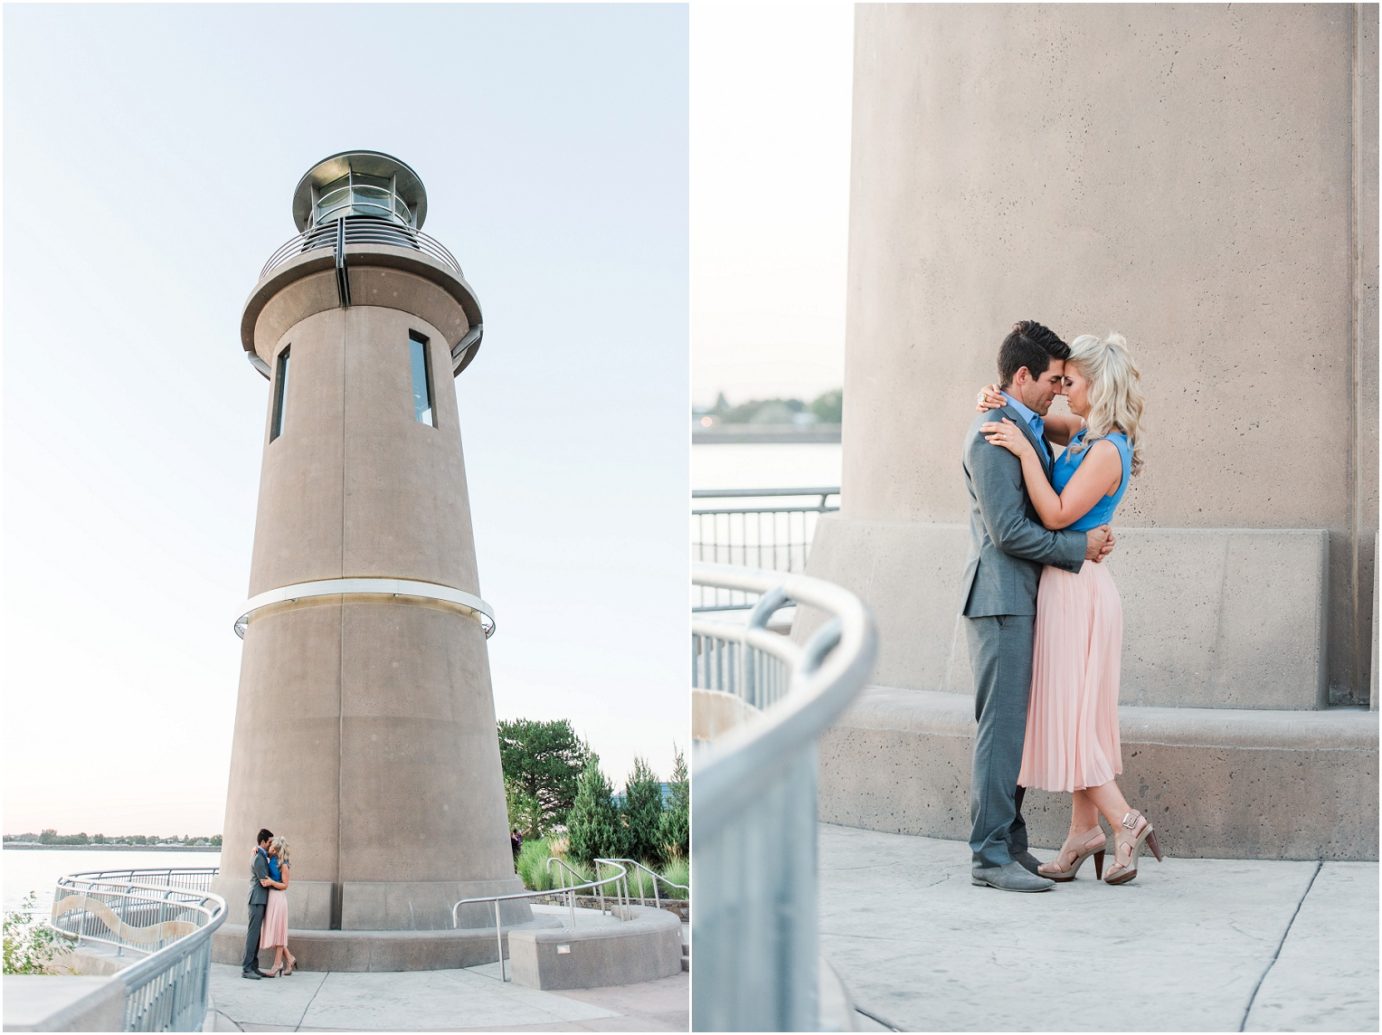 Clover Island Anniversary Session Kennewick WA Couple in front of lighthouse